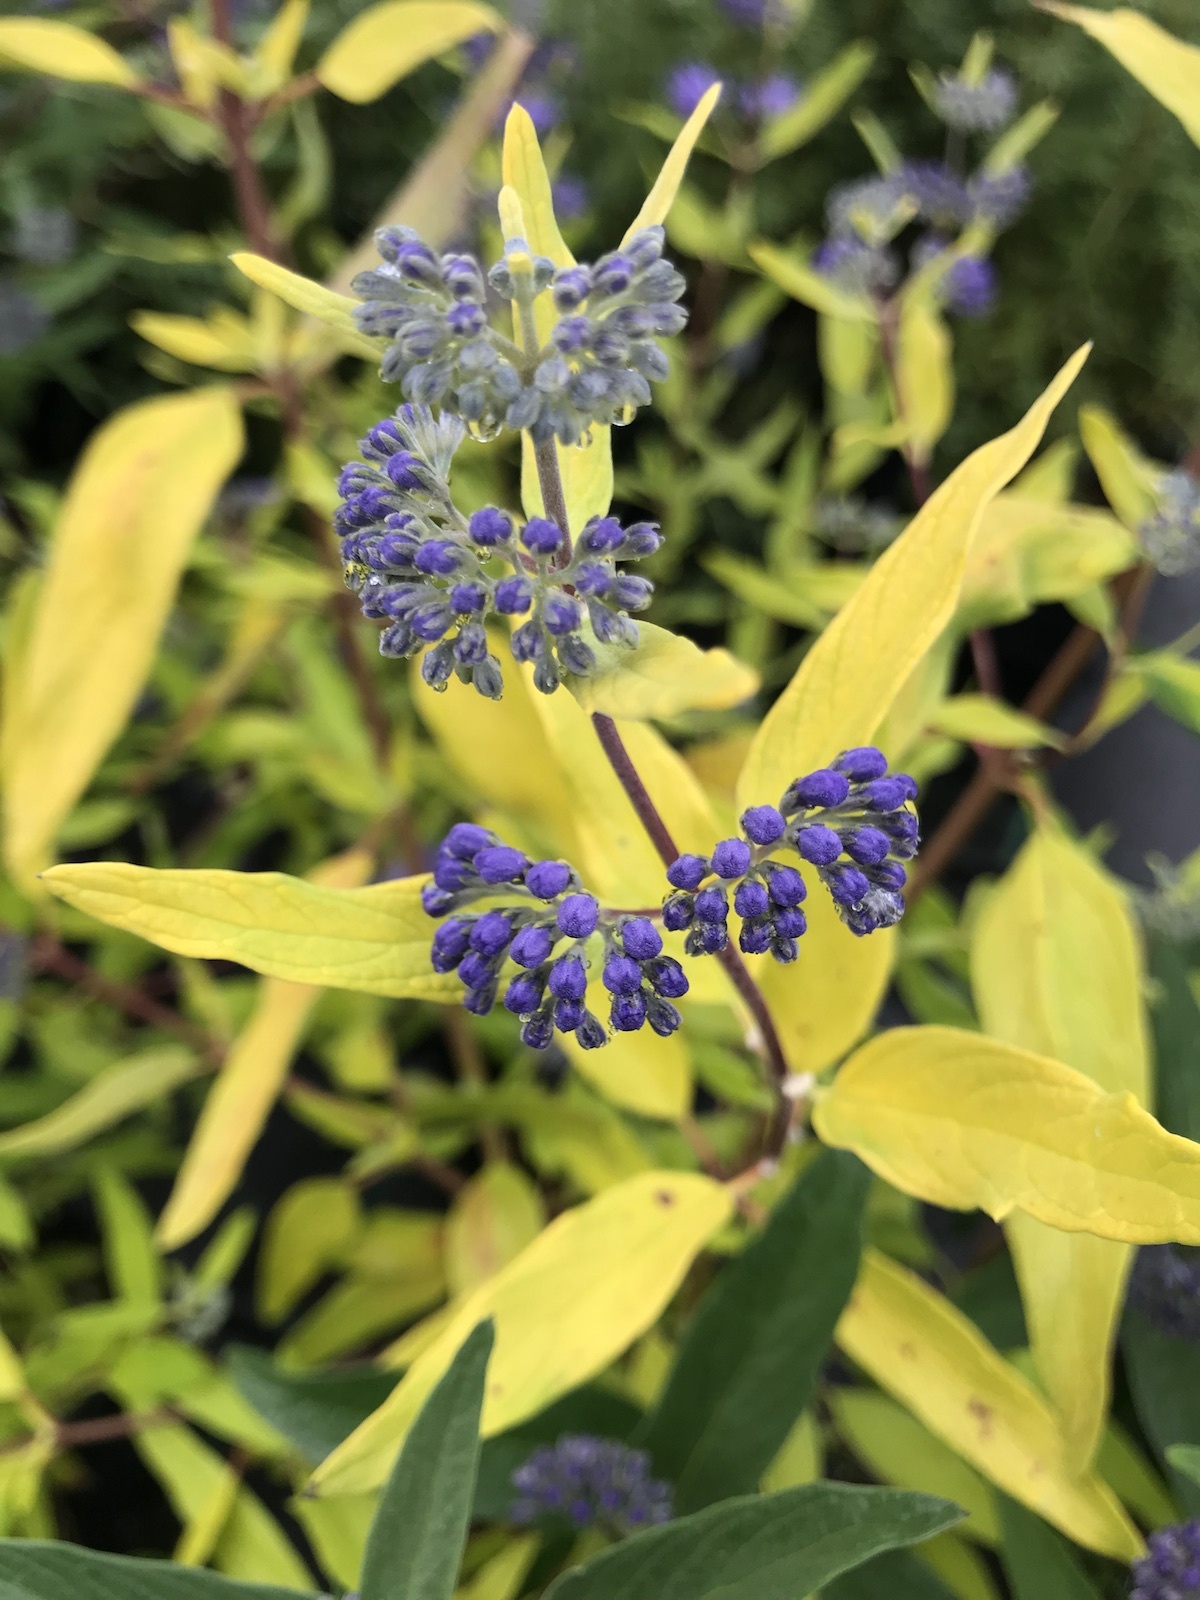 Caryopteris x clandonensis Worcester Gold-Bluebeard "Worcester Gold" Plant in...